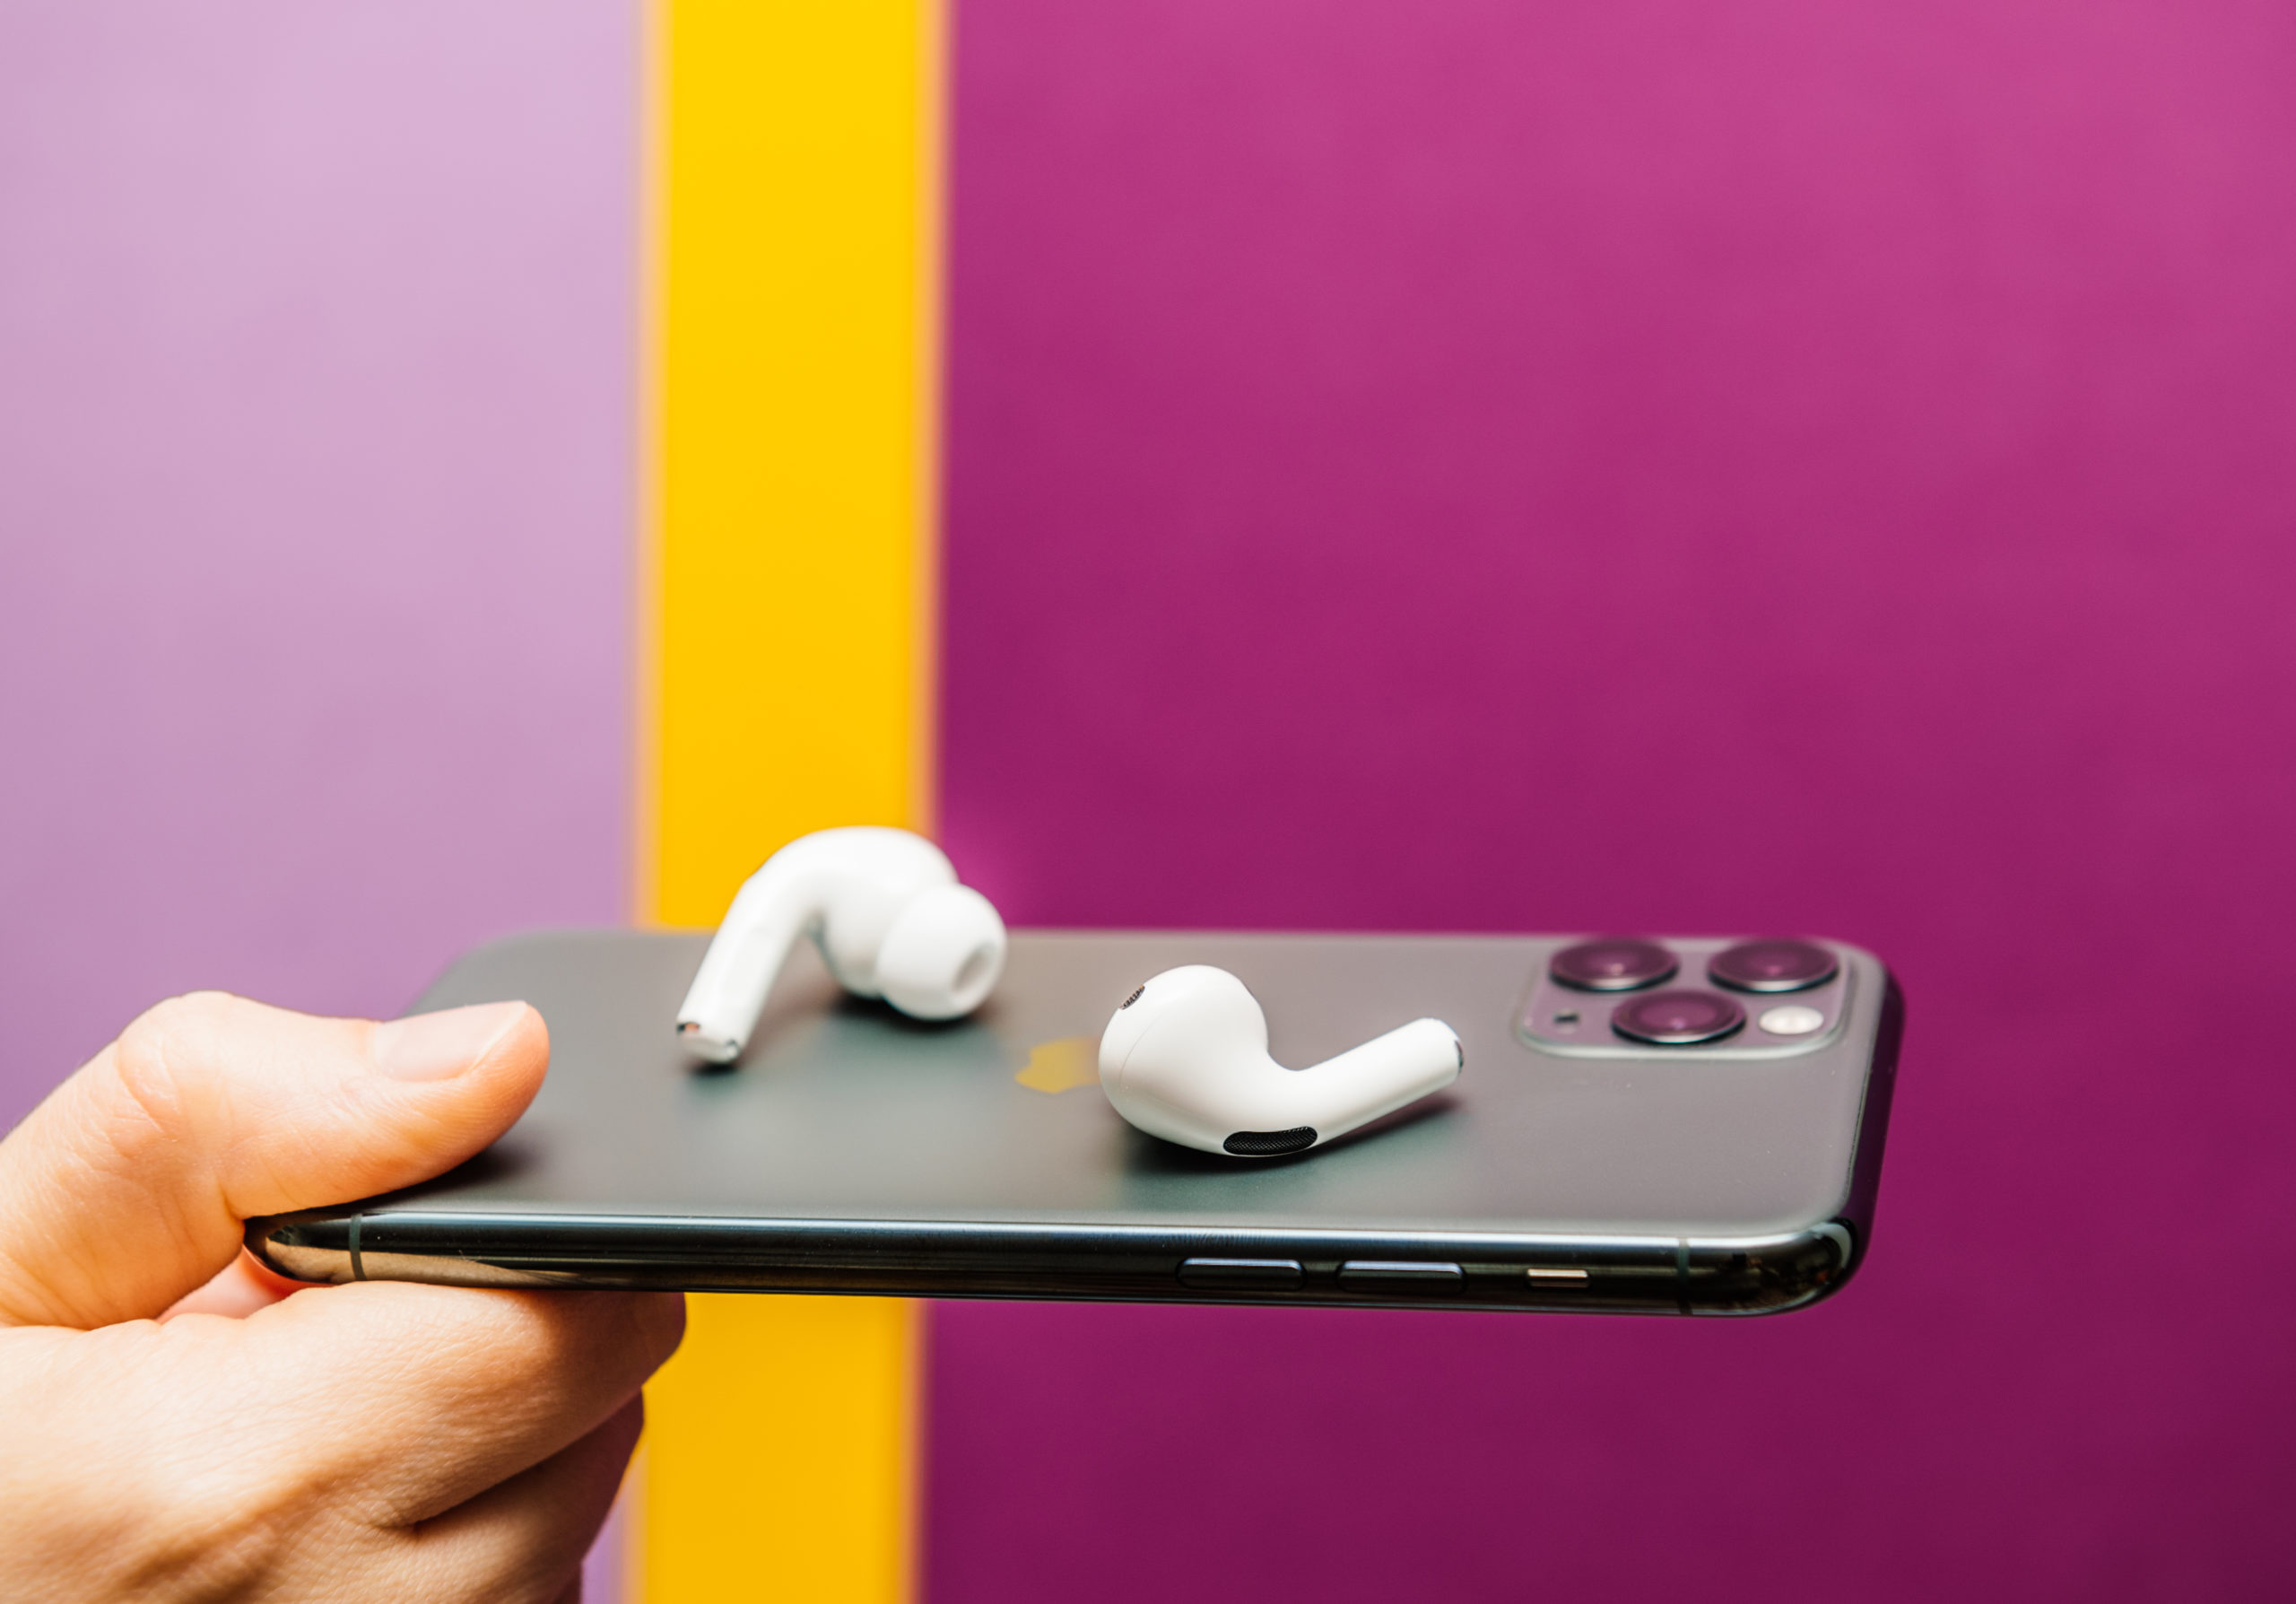 Holding iPhone with AirPods Pro (From: ©adrianhancu/123RF.COM)